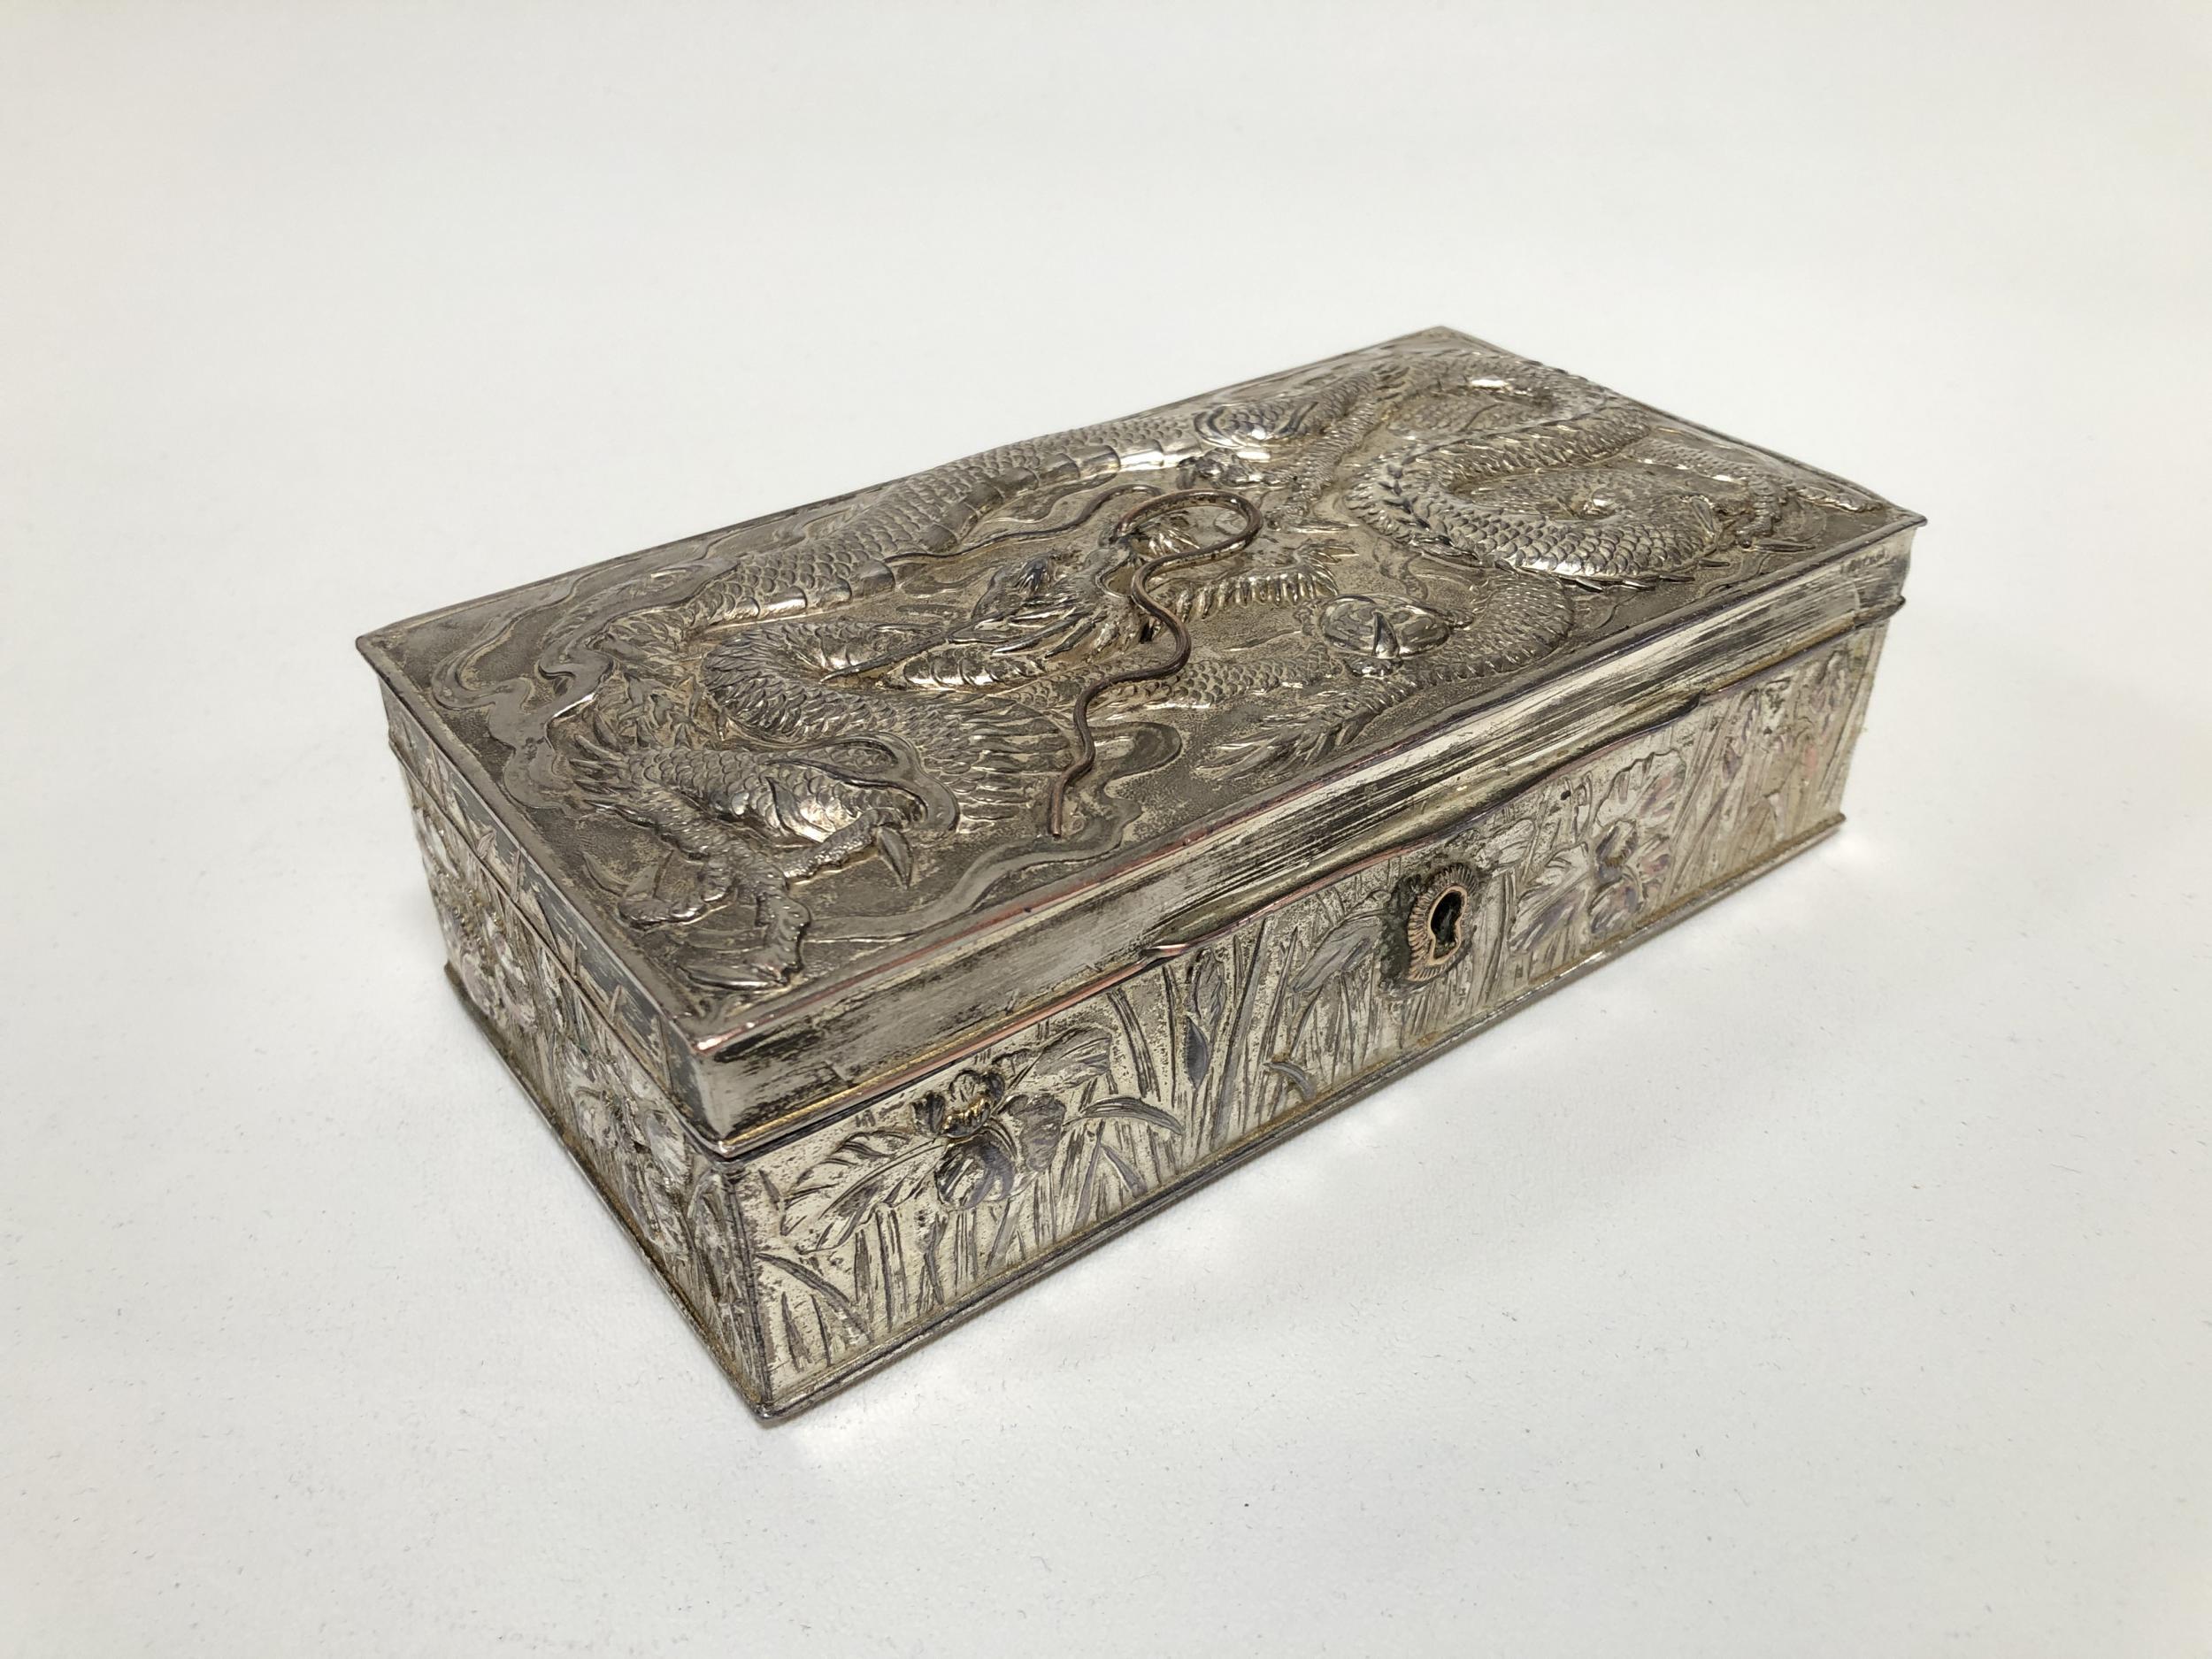 This beautiful ornately repousse silver-plated keepsake or jewelry box features a detailed dragon on top and grass-like designs on the sides. The interior is mahogany wood. This piece is projected to be from Japan in the 1920's.

This box features